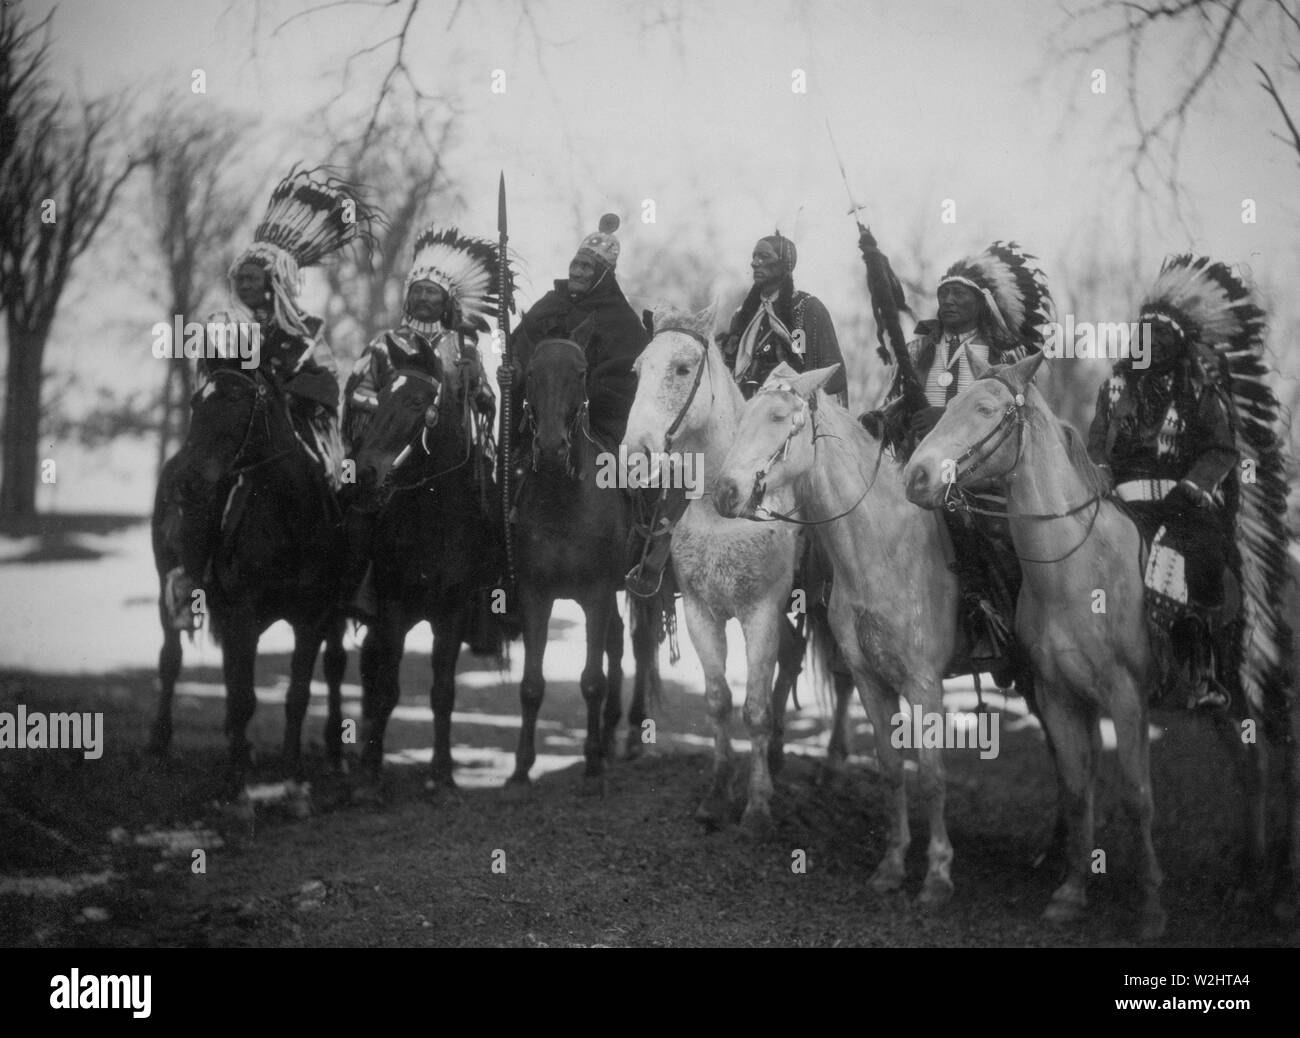 Six tribal leaders (l to r) Little Plume (Piegan), Buckskin Charley (Ute), Geronimo (Chiricahua Apache), Quanah Parker (Comanche), Hollow Horn Bear (Brulé Sioux), and American Horse (Oglala Sioux) on horseback in ceremonial attire Stock Photo